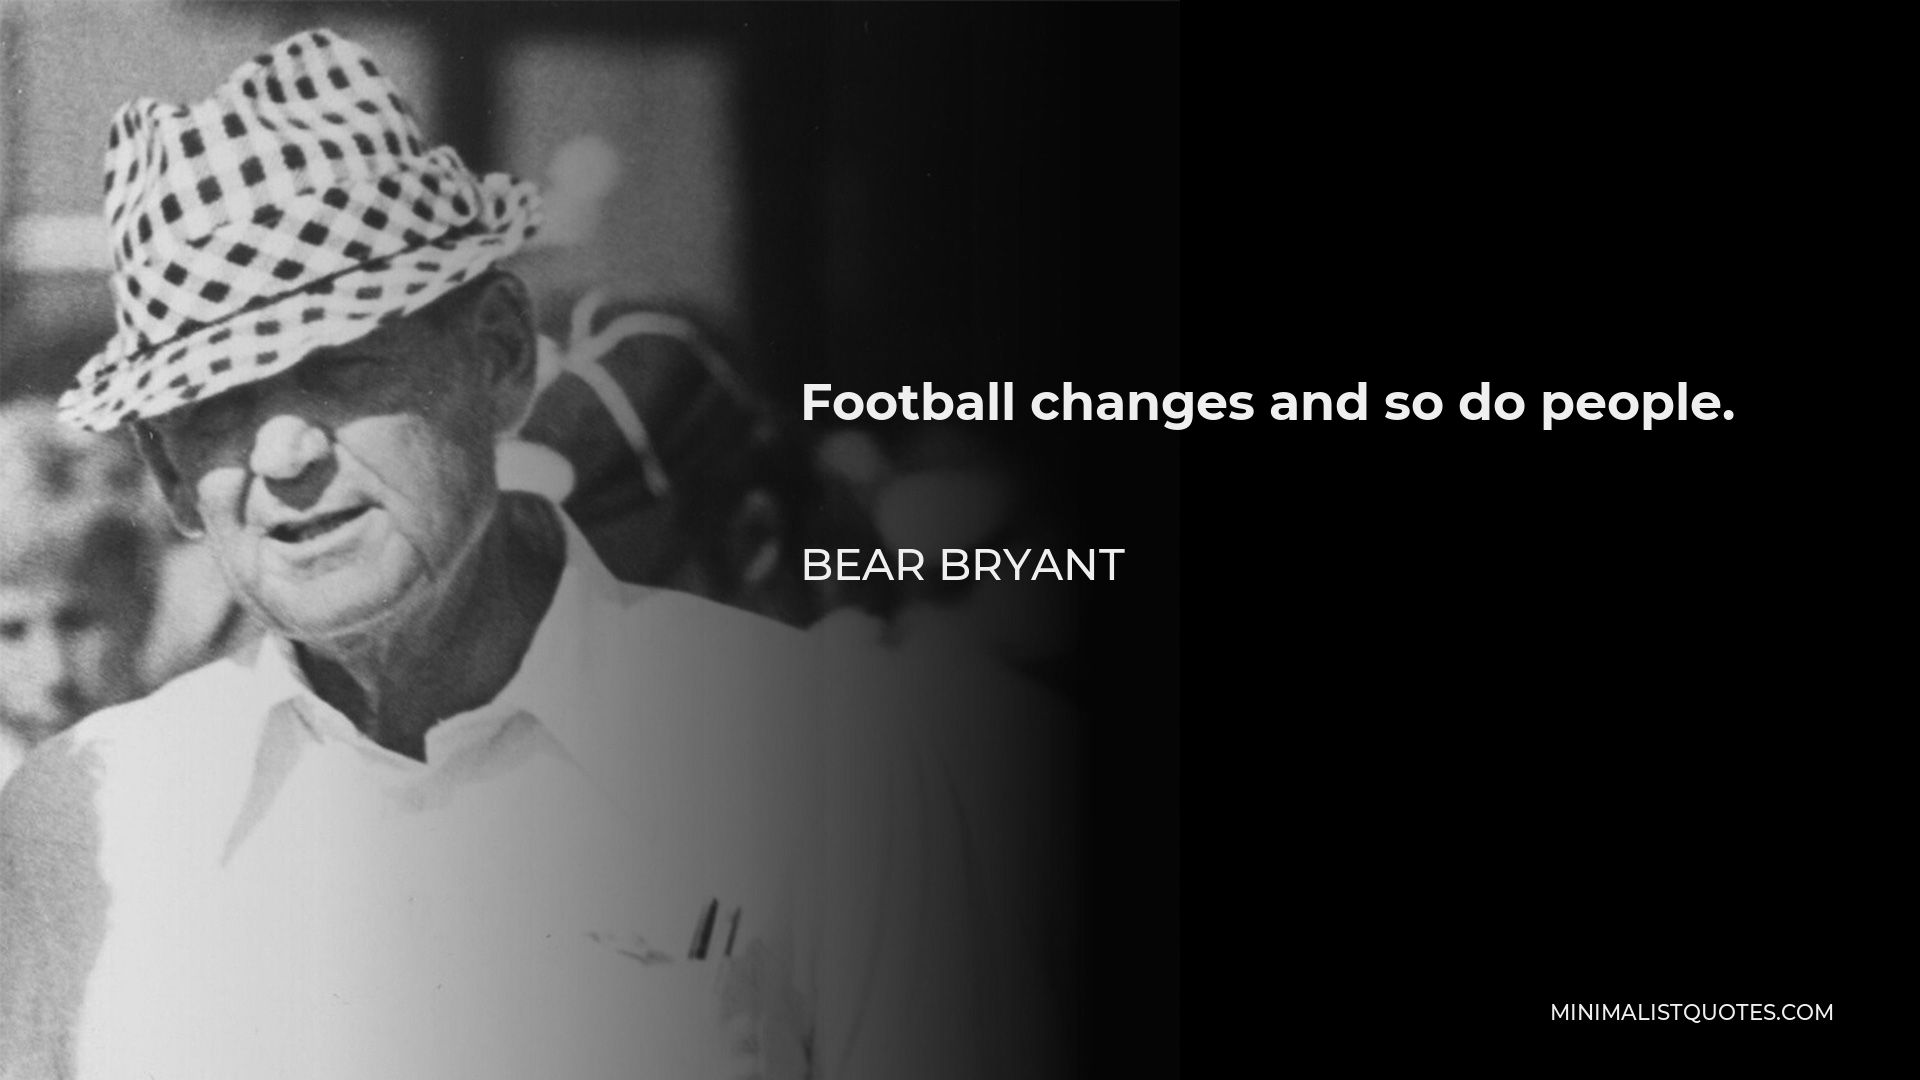 Bear Bryant Quote - Football changes and so do people.